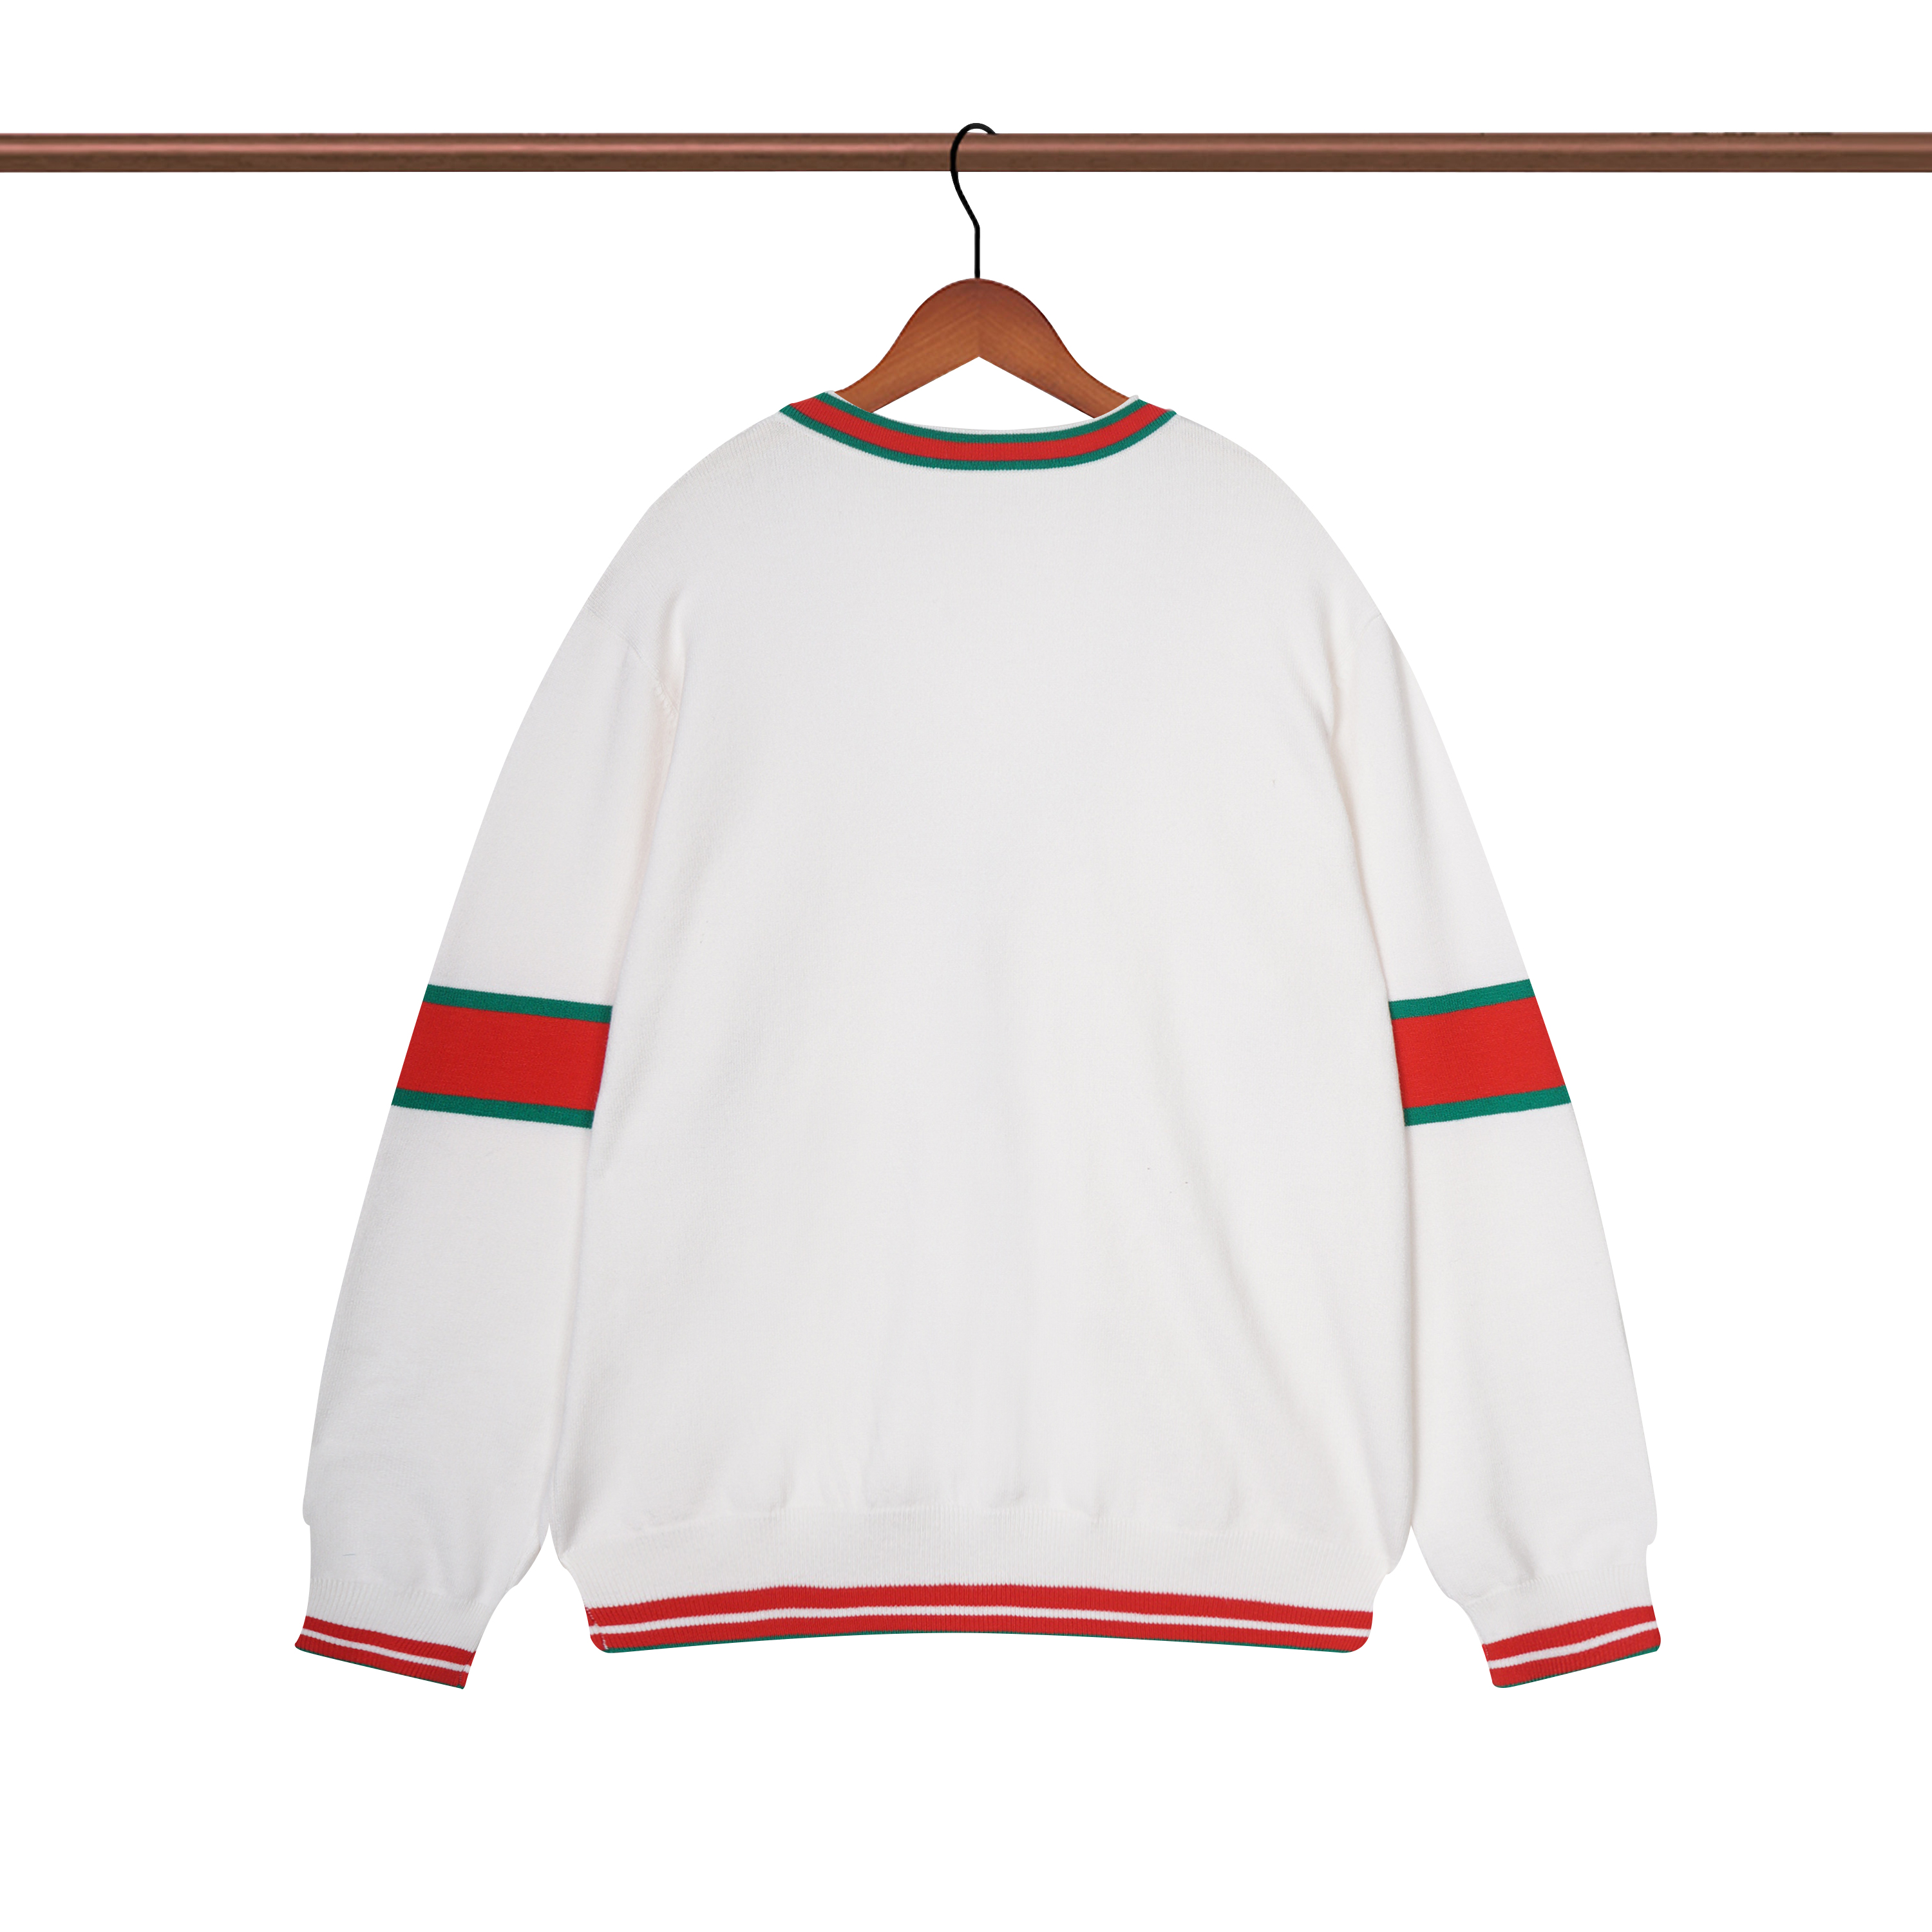 Gucci Cartigan Sweaters Unisex # 260679, cheap Gucci Sweaters, only $45!